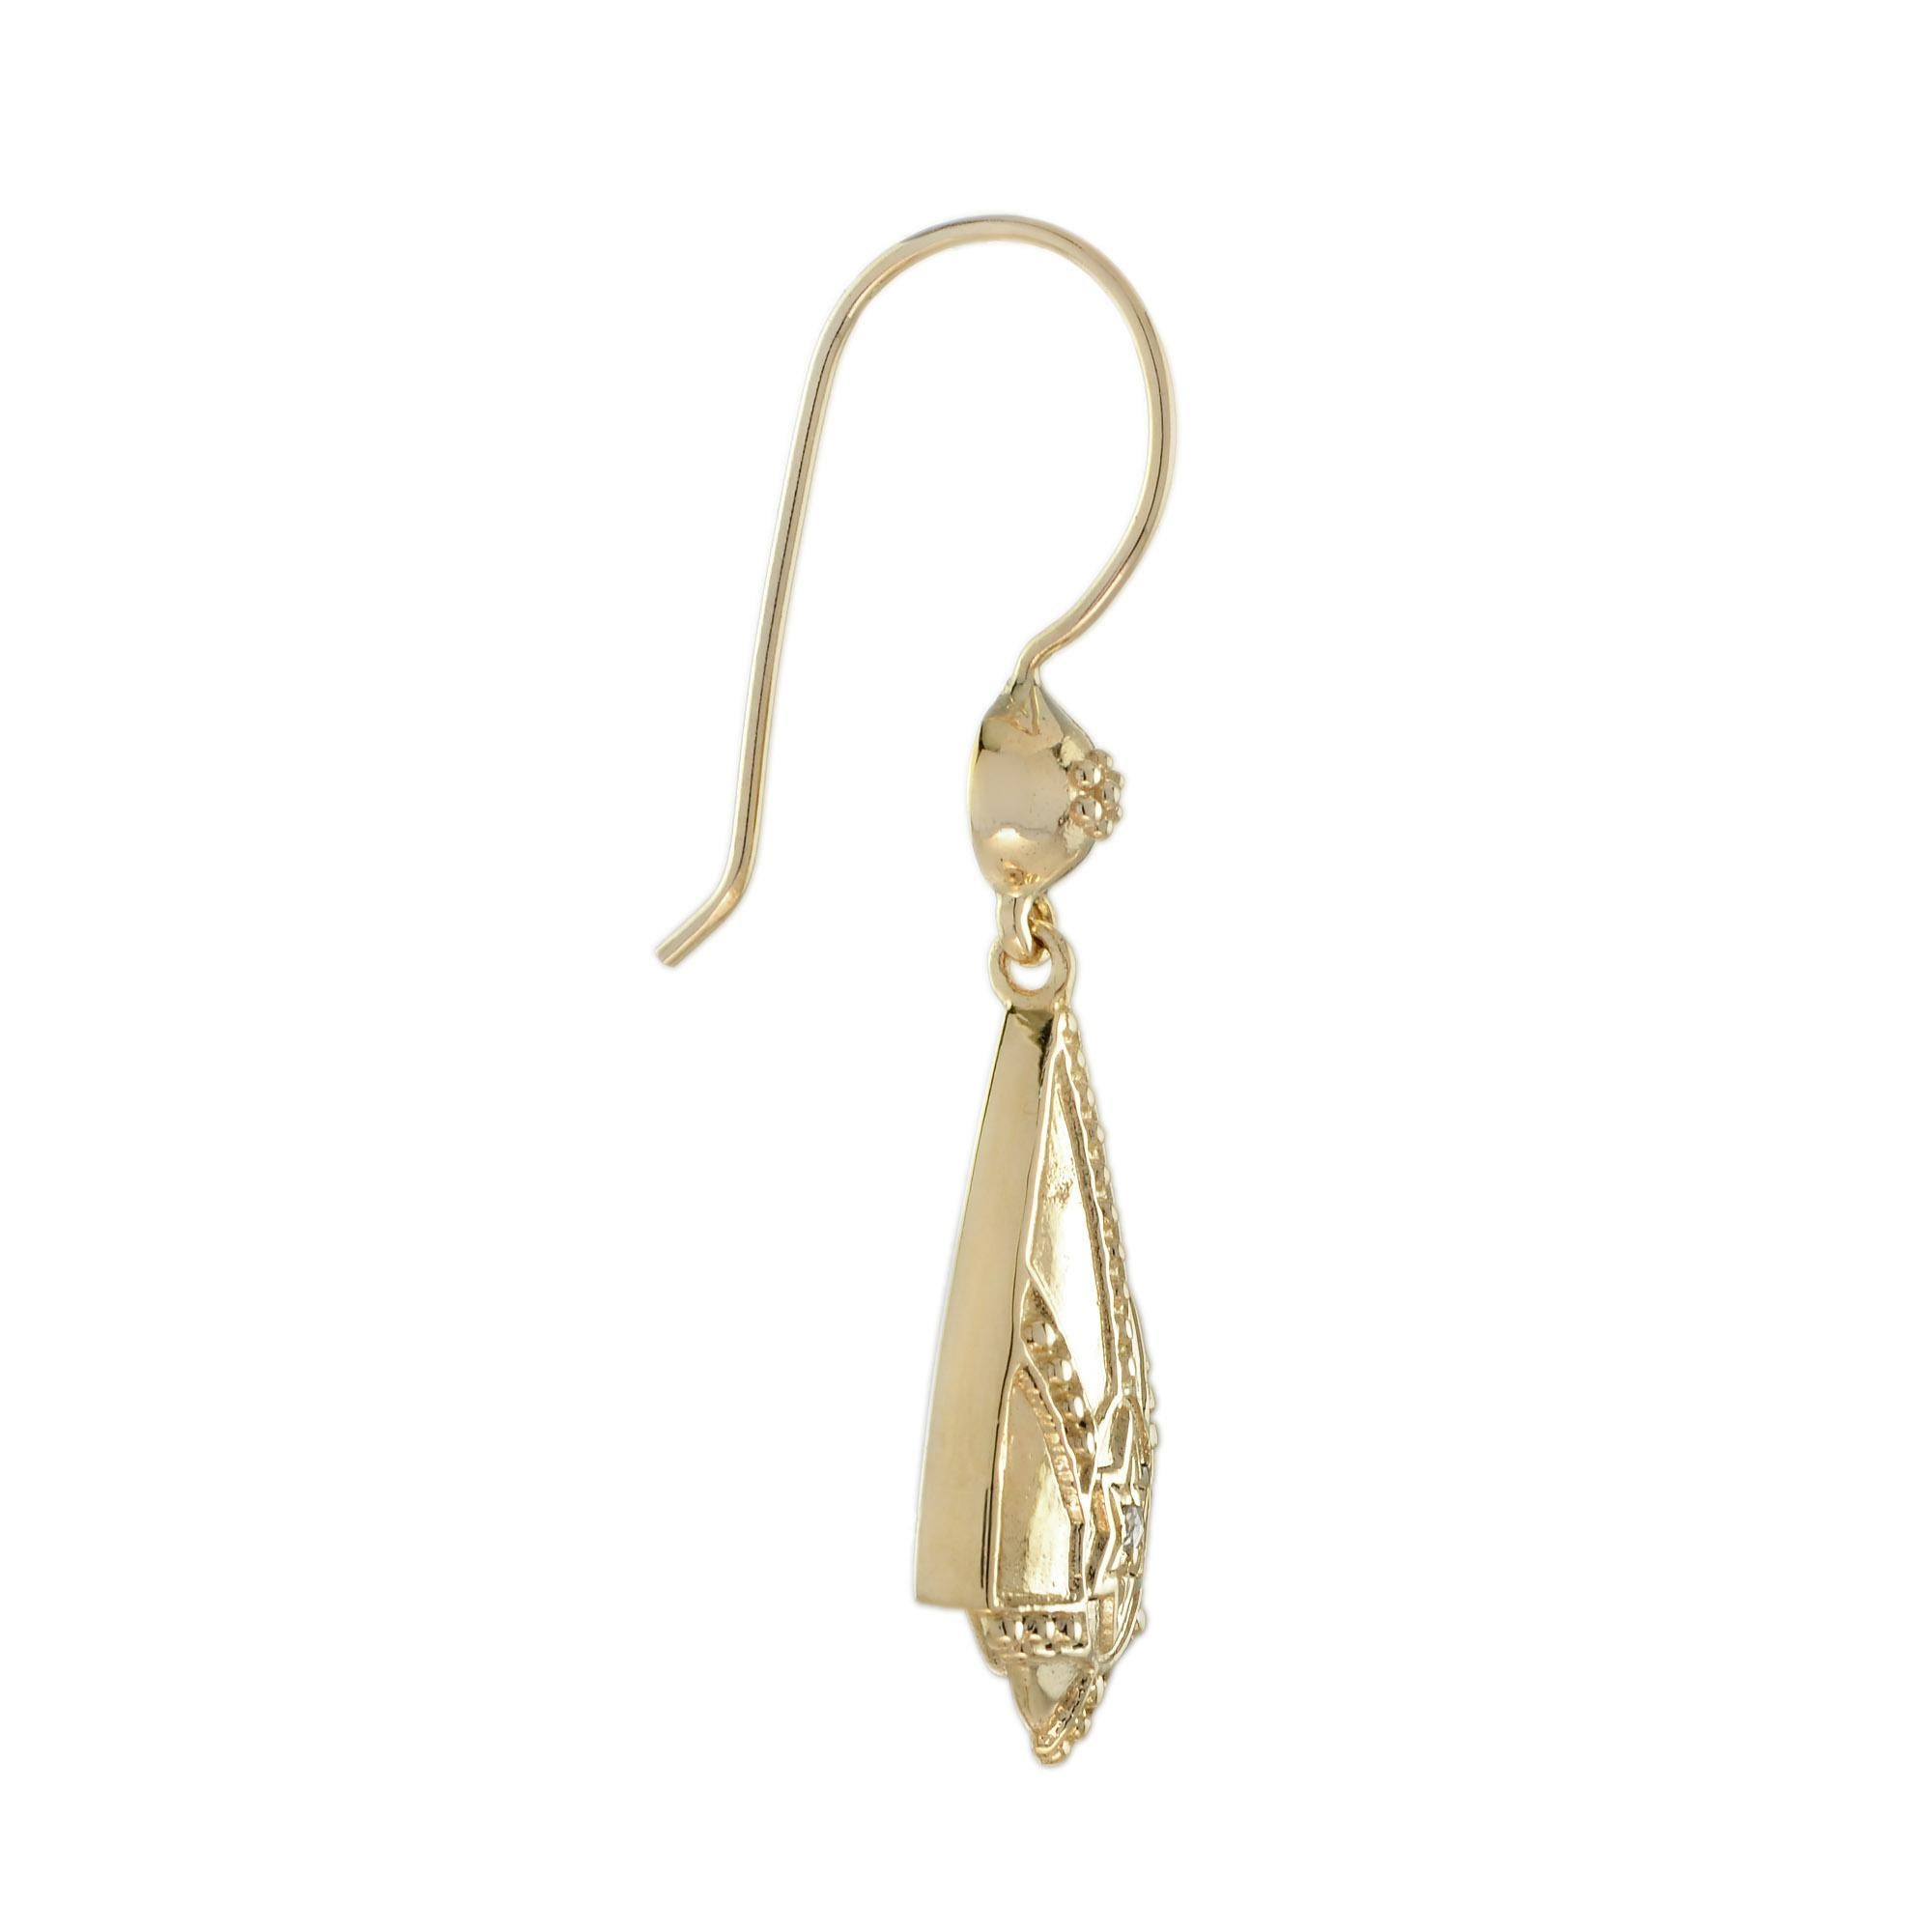 These classic Art Deco inspired diamond earrings are crafted in warm tone of 9k yellow gold. The body of each earring features a geometric design set with small lovely round cut diamond framed in a star motif. These earrings have a unique vintage